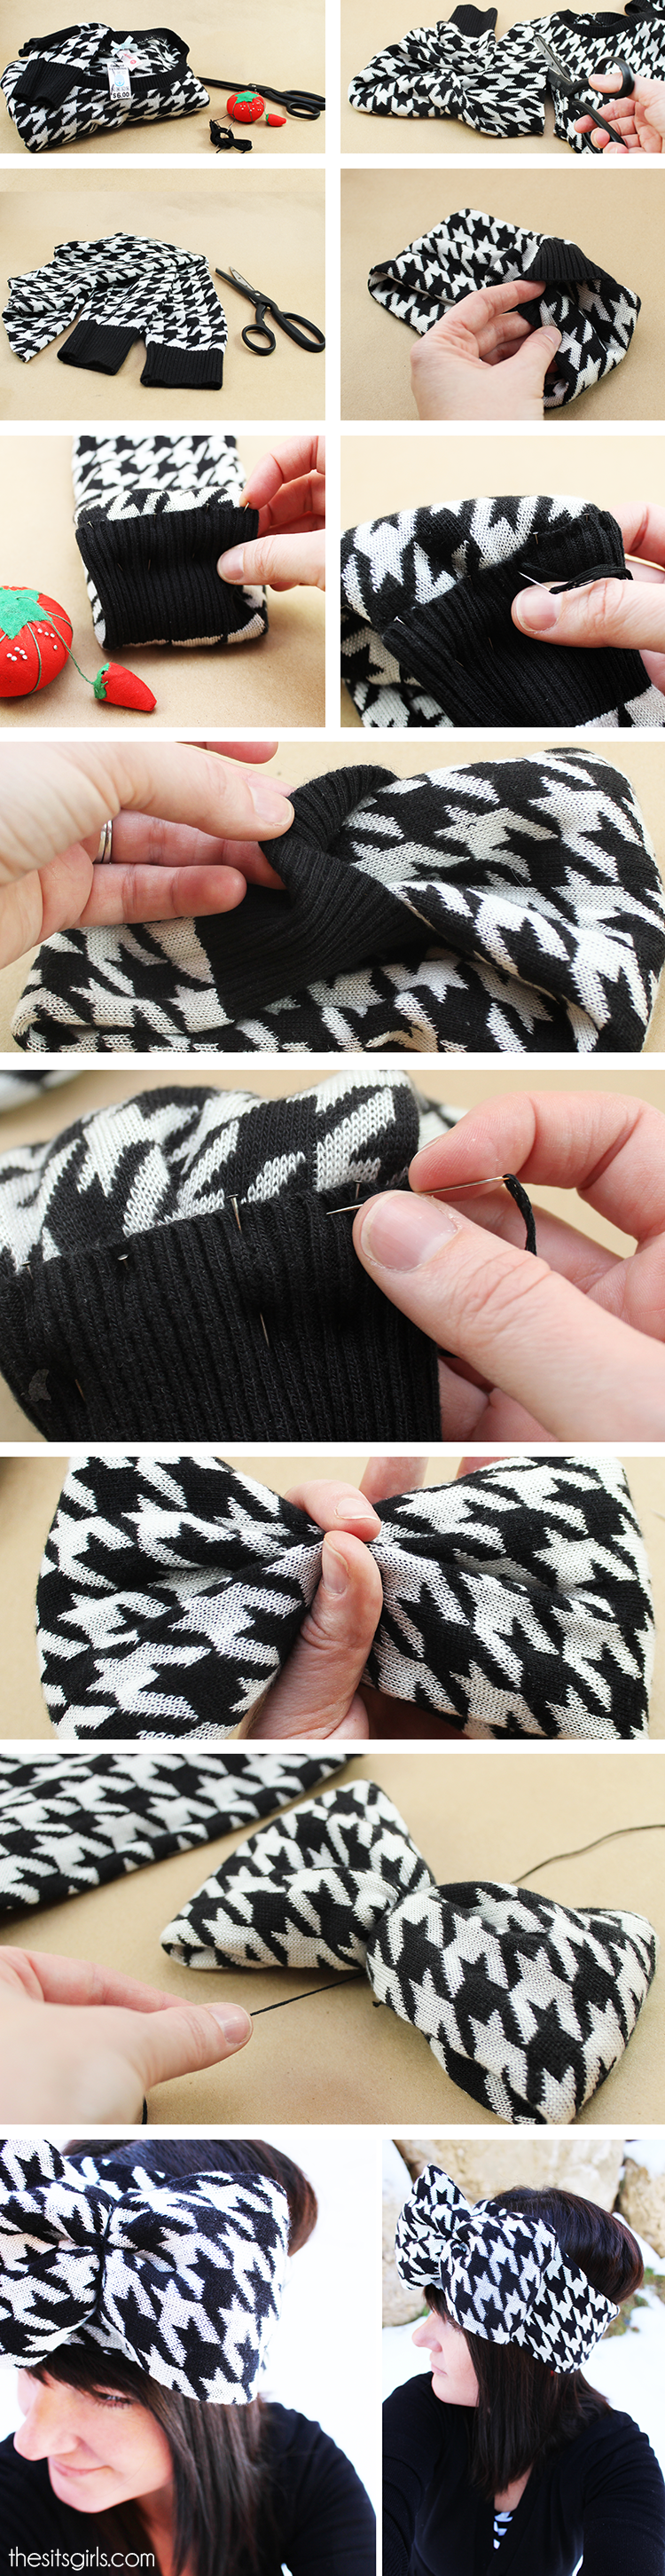 Step-by-step tutorial for making a pattern ear warmer head wrap with a bow. 